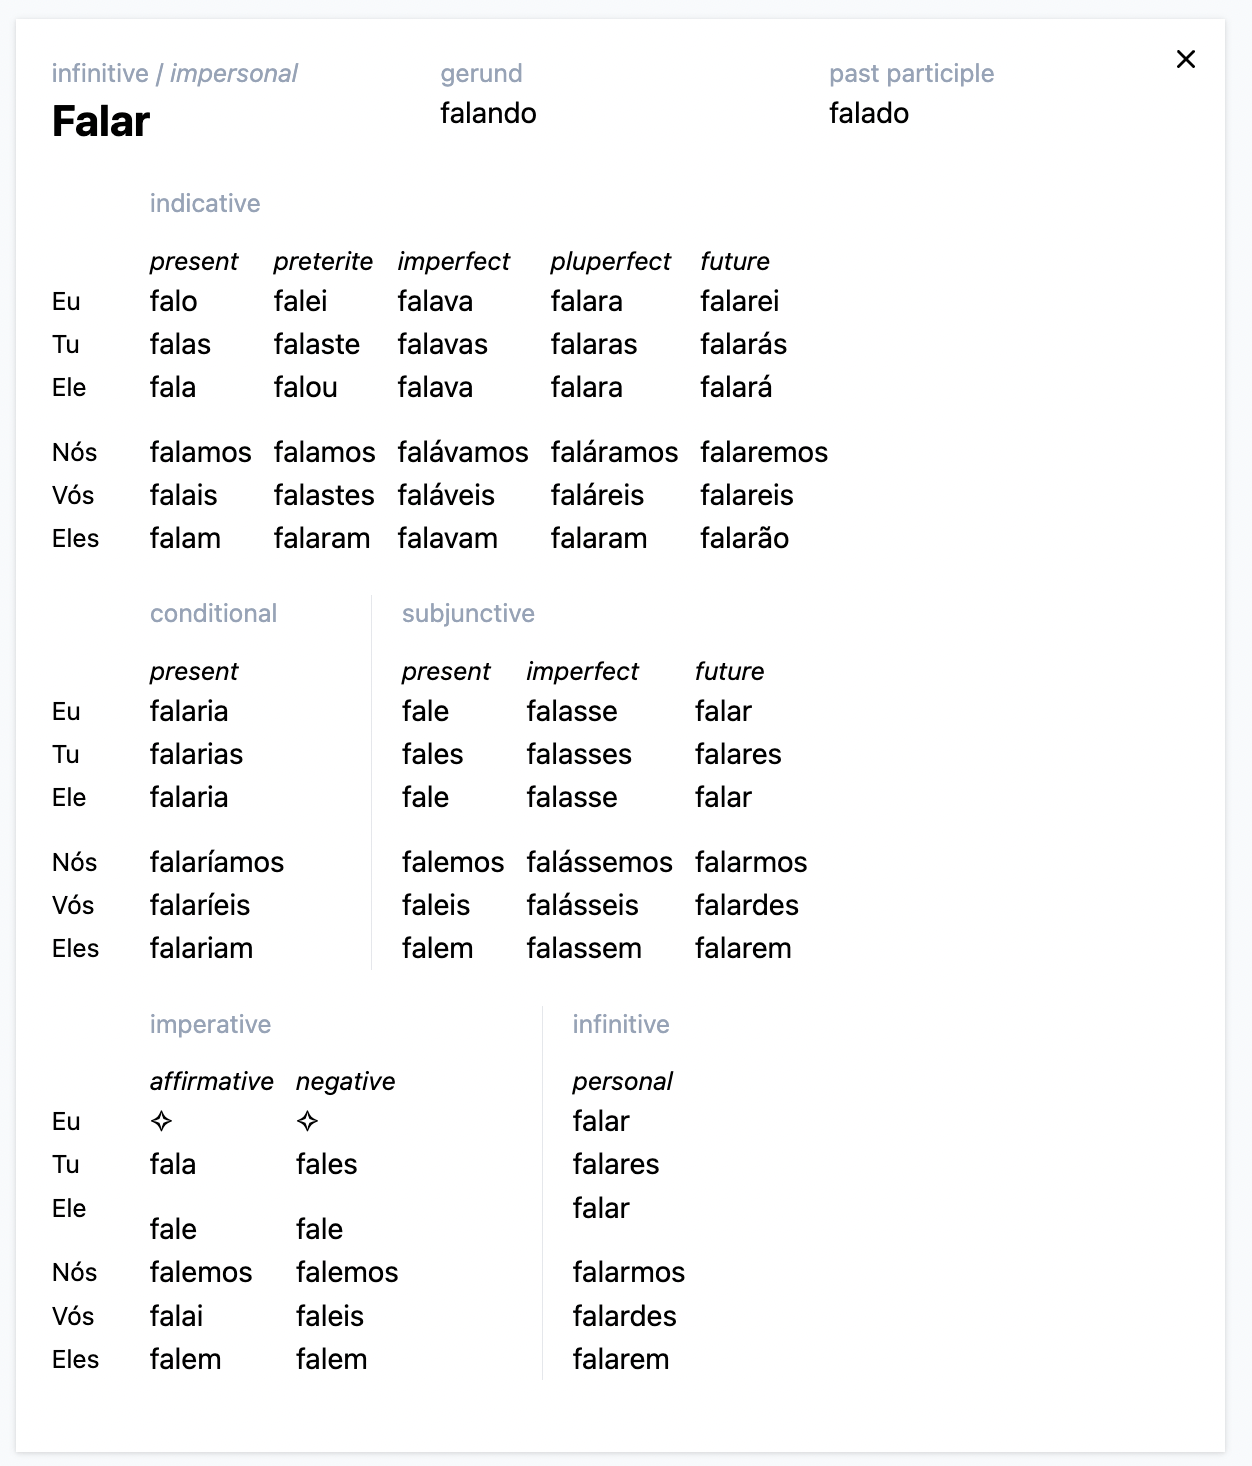 verb conjugation table for the word "falar"